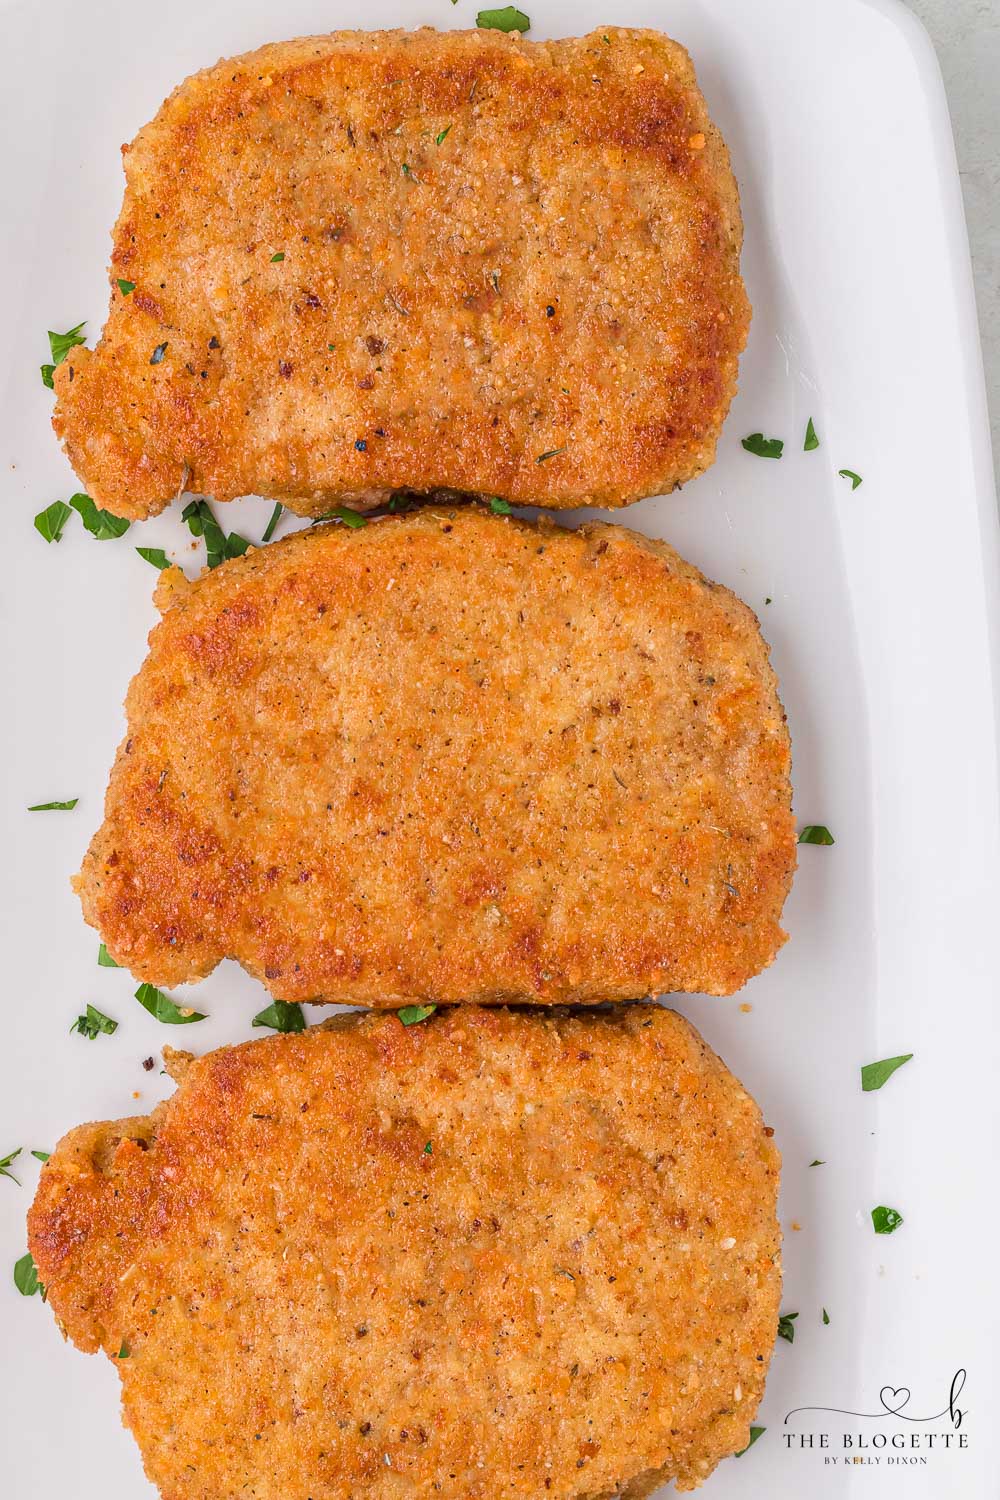 Breaded Fried Pork Chops cooked to crispy perfection! Golden brown boneless pork chops are crispy on the outside and juicy on the inside.